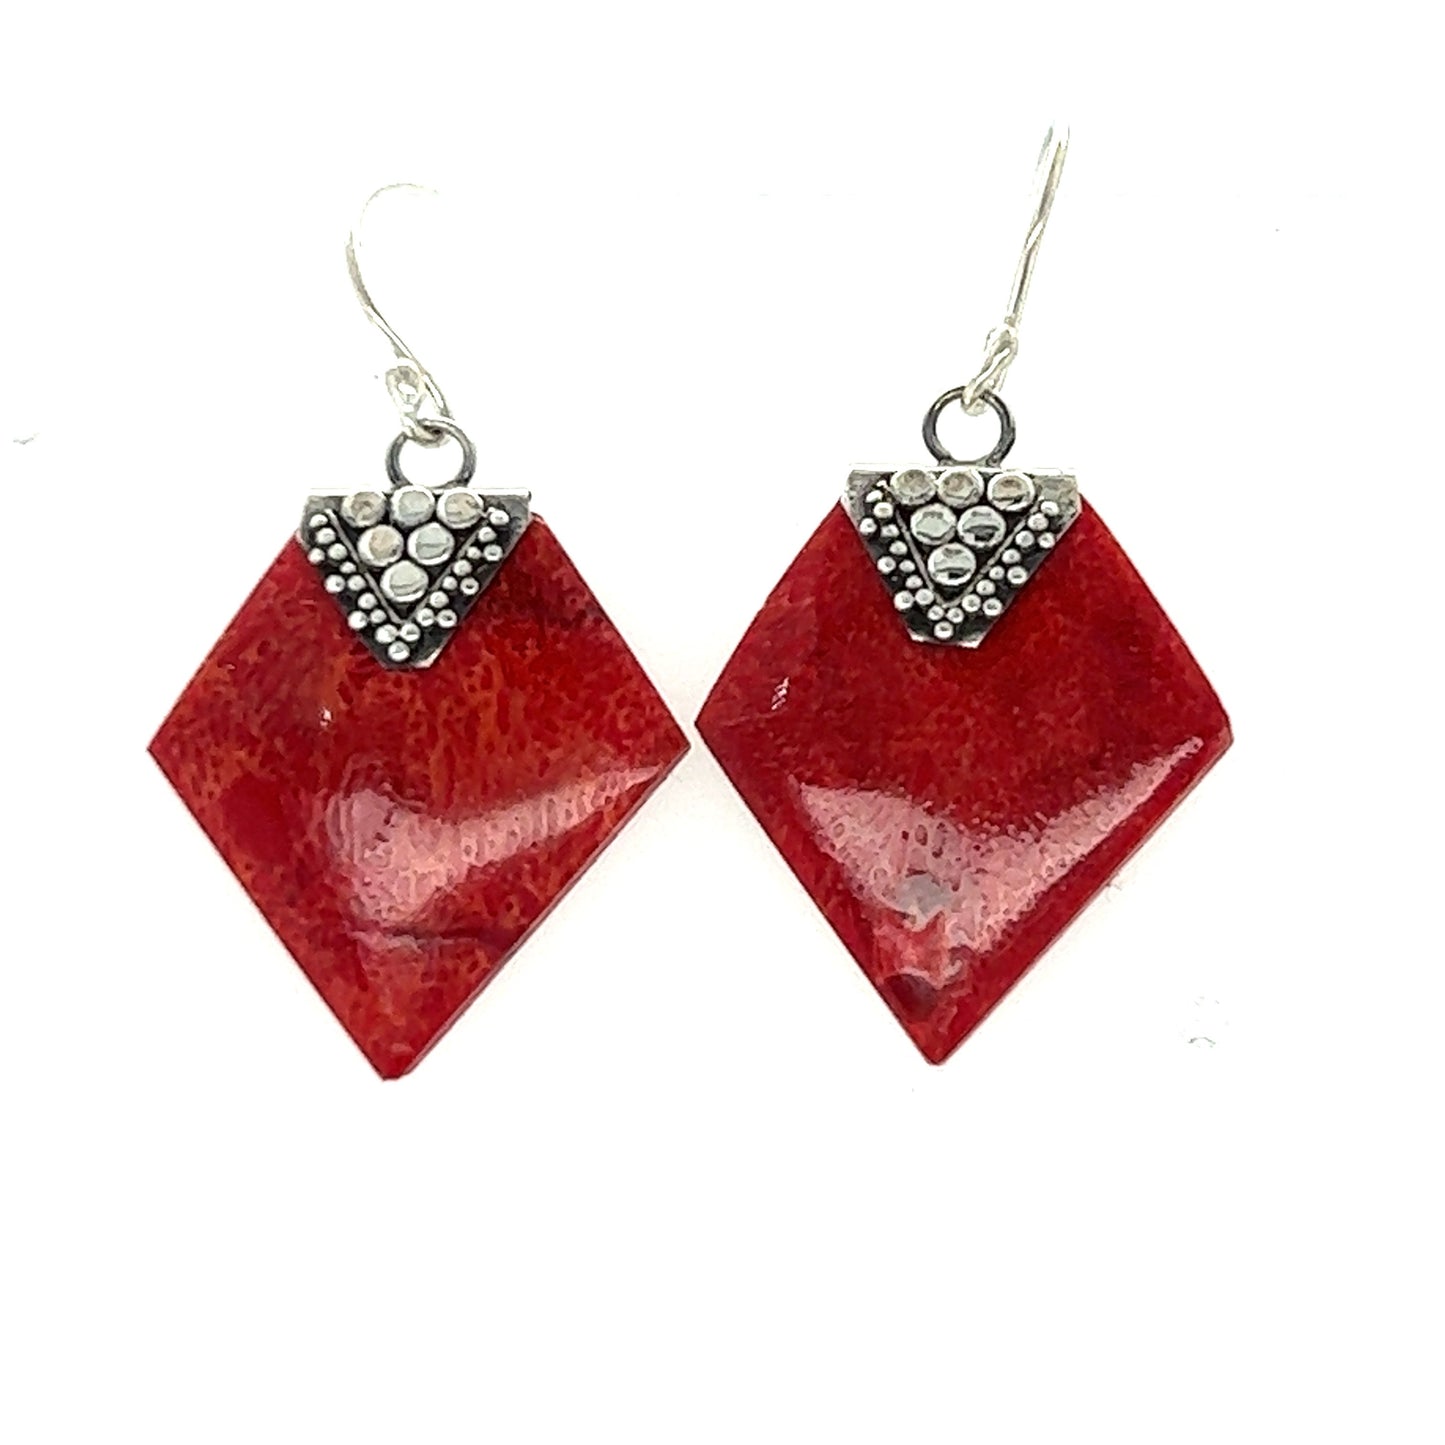 A pair of red and silver Super Silver Sponge Coral Diamond Earrings with a diamond shape.